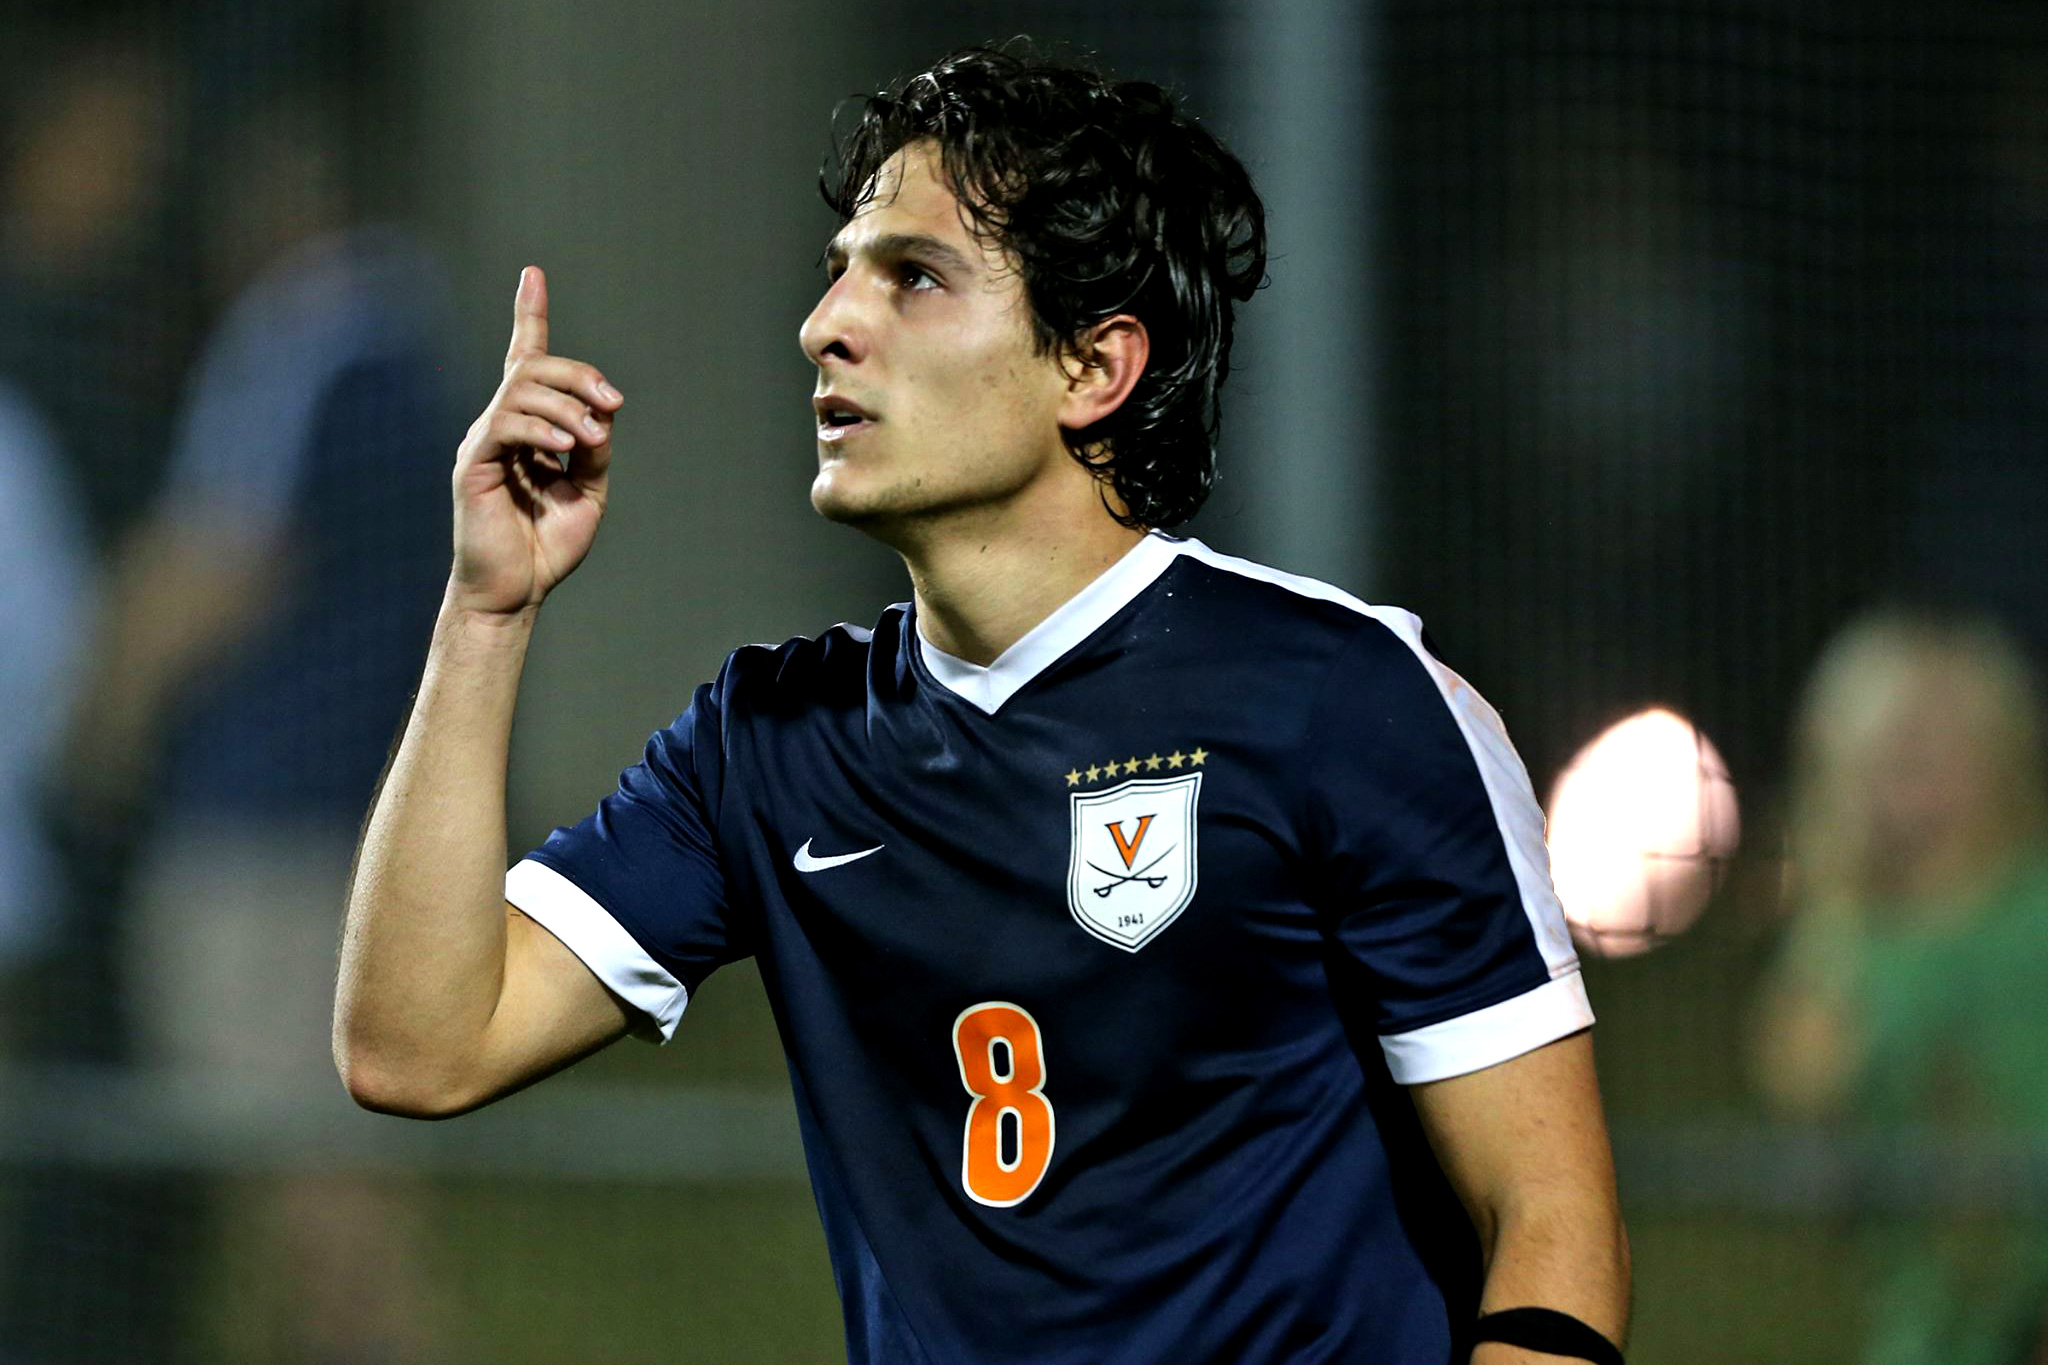 Though he was not a starter at the beginning of the season, Pablo Aguilar is among the soccer team’s leading scorers and recently was named second-team All-ACC. (Photo by Matt Riley, UVA Athletics)